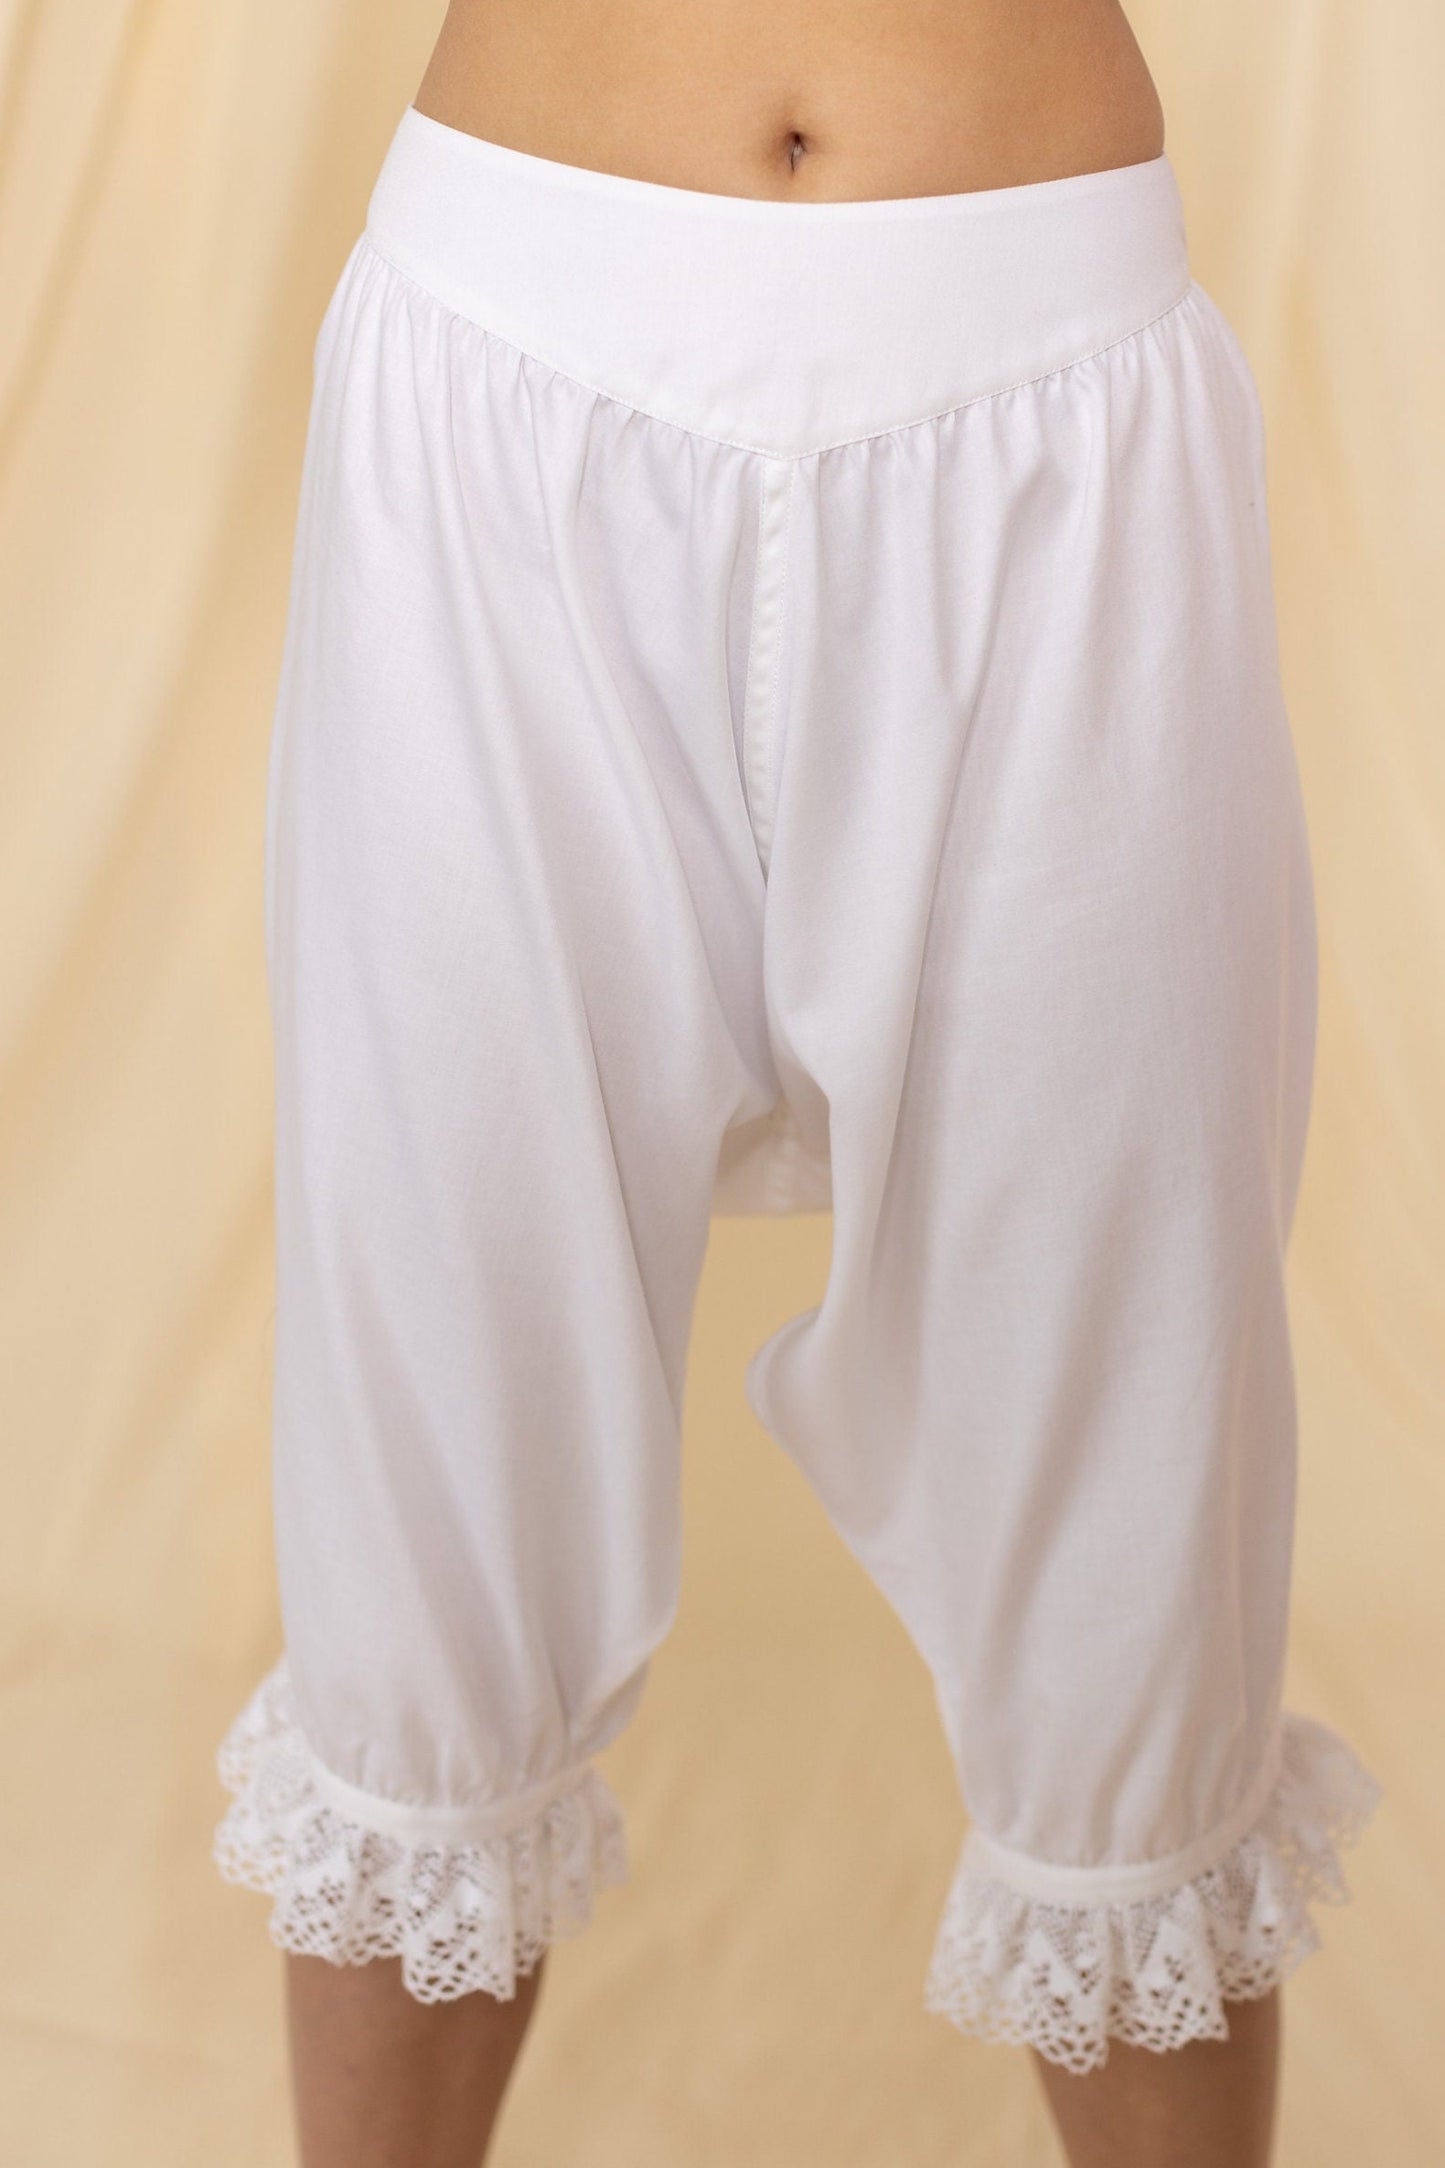 Maria – Duchess of Bedford - Victorian Inspired Bloomers in White Cotton